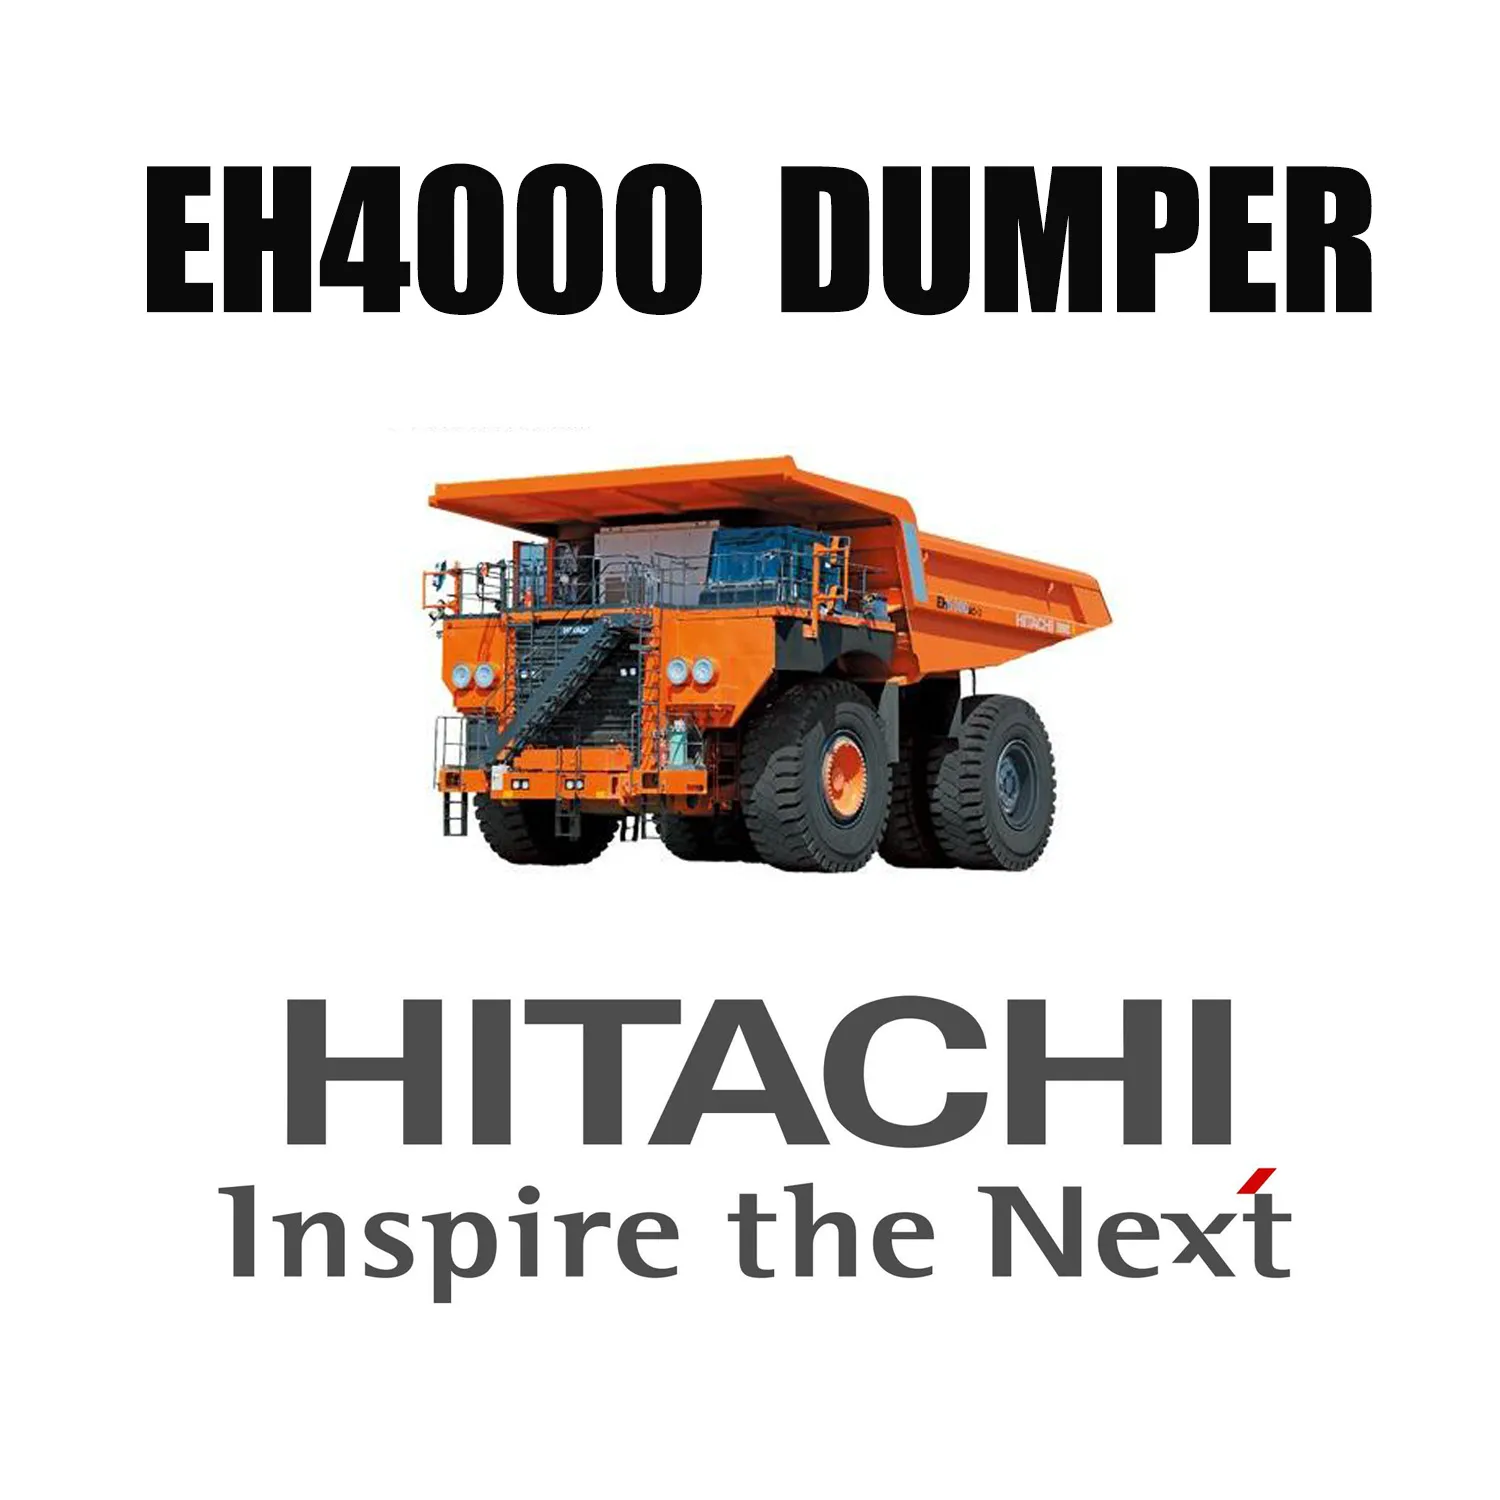 Rigid Dump Trucks HITACHI EH4000 Equipped with 46/90R57 Mining Earthmover Tyres